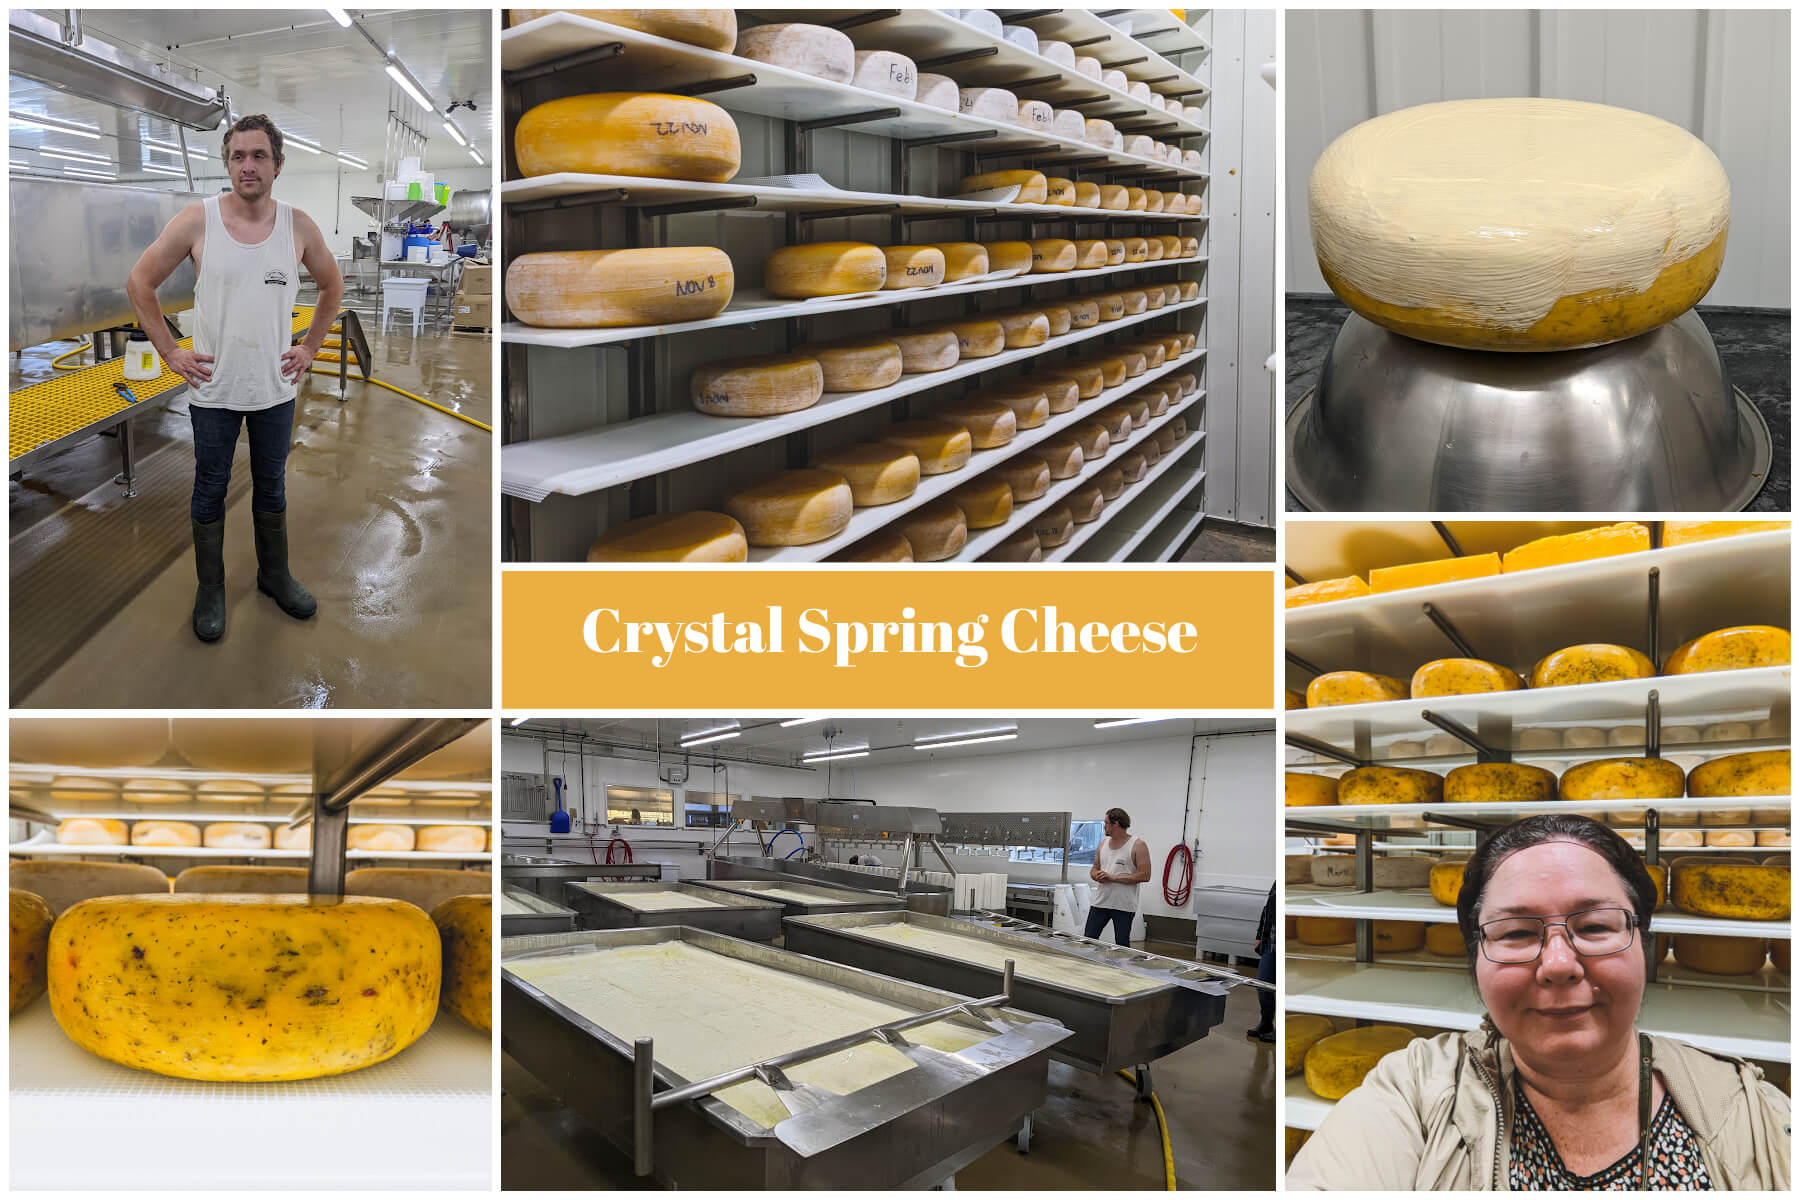 A collection of photos captured at Crystal Springs Cheese.